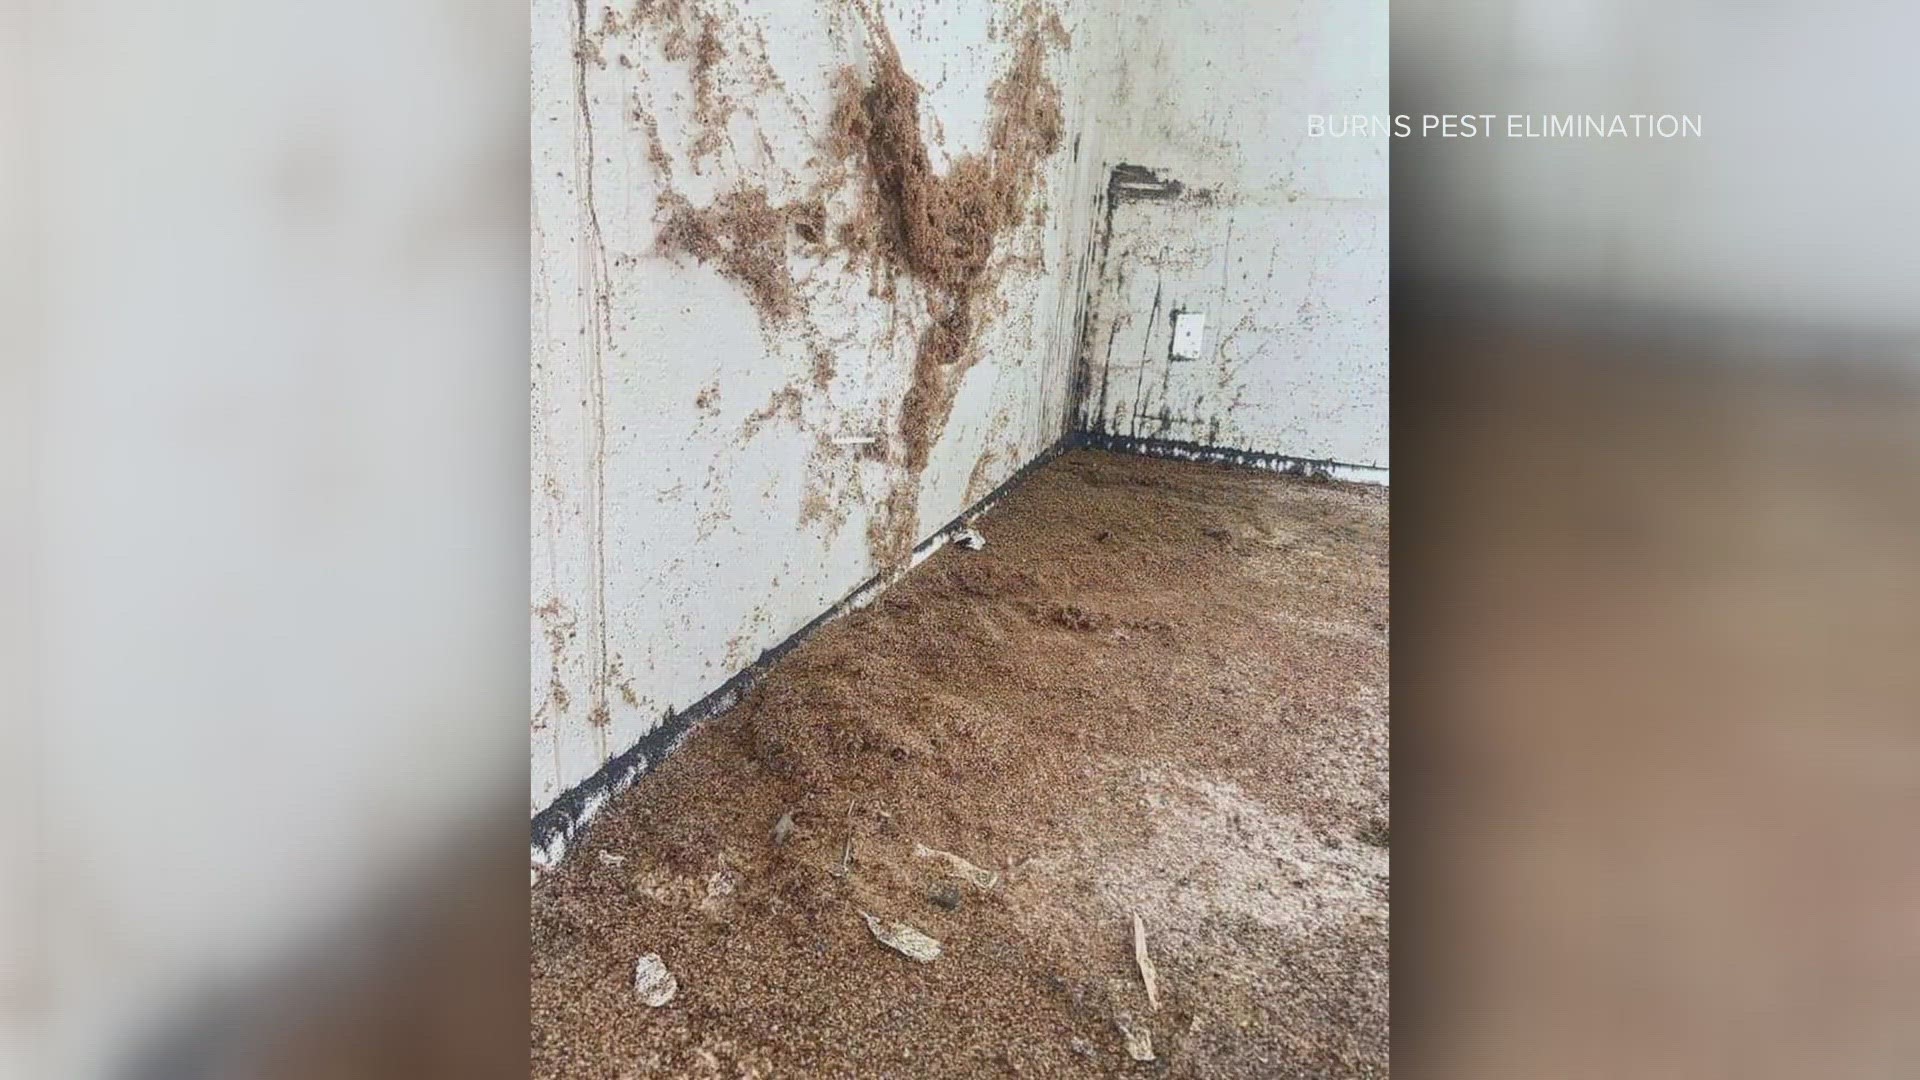 Thousands of bed bugs were recently found in two infestations that happened in Arizona. These "massive" infestations were found in Sun City and Scottsdale.